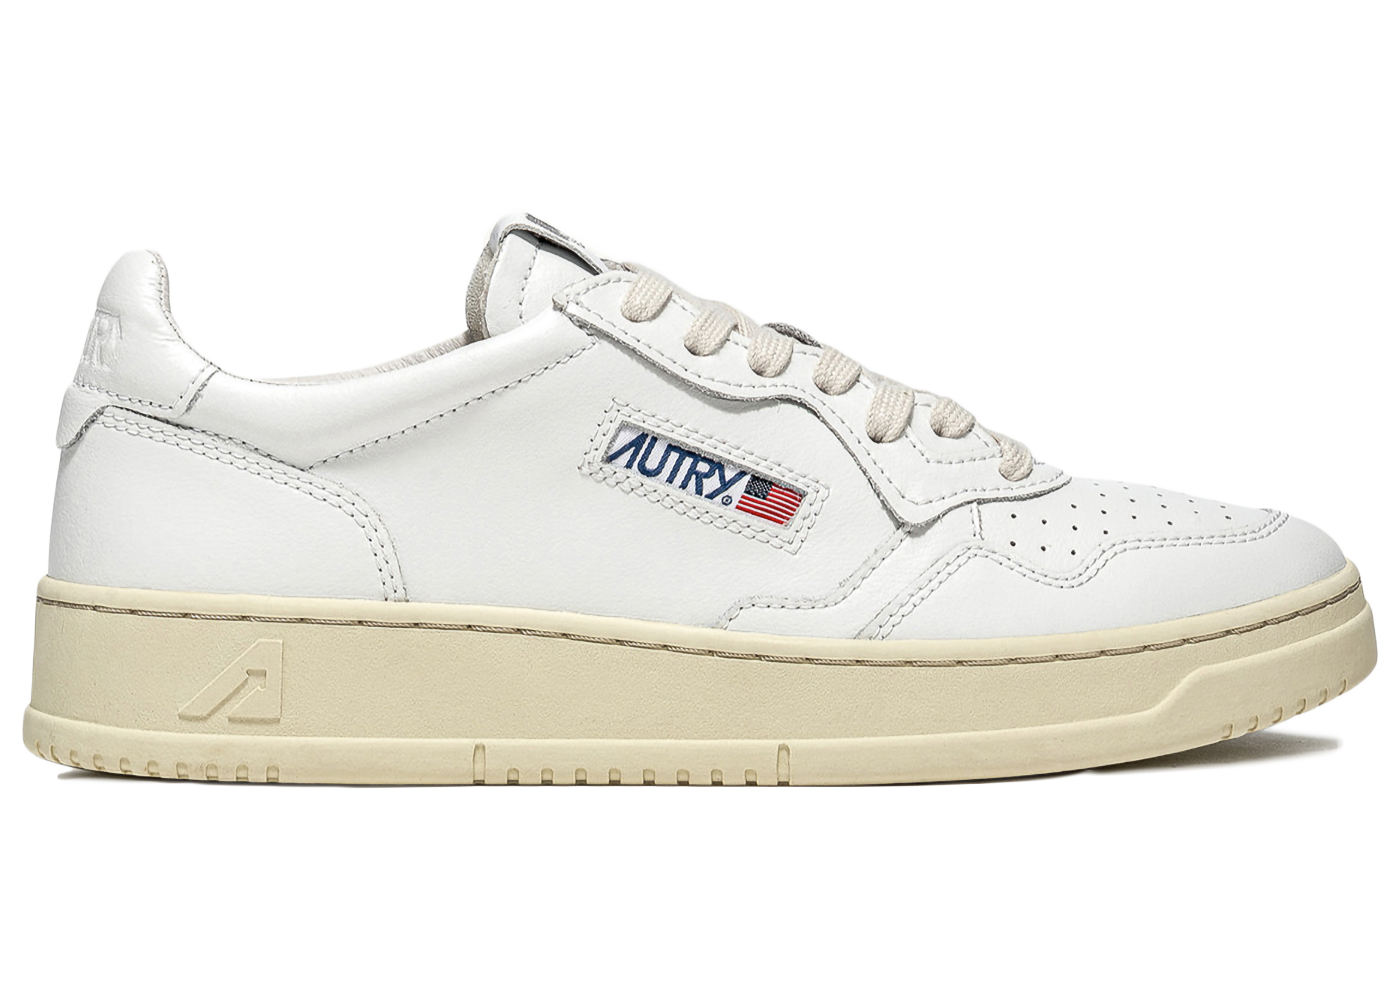 Autry Medalist Leather Low White (Women's) - AULW-LL15 - US